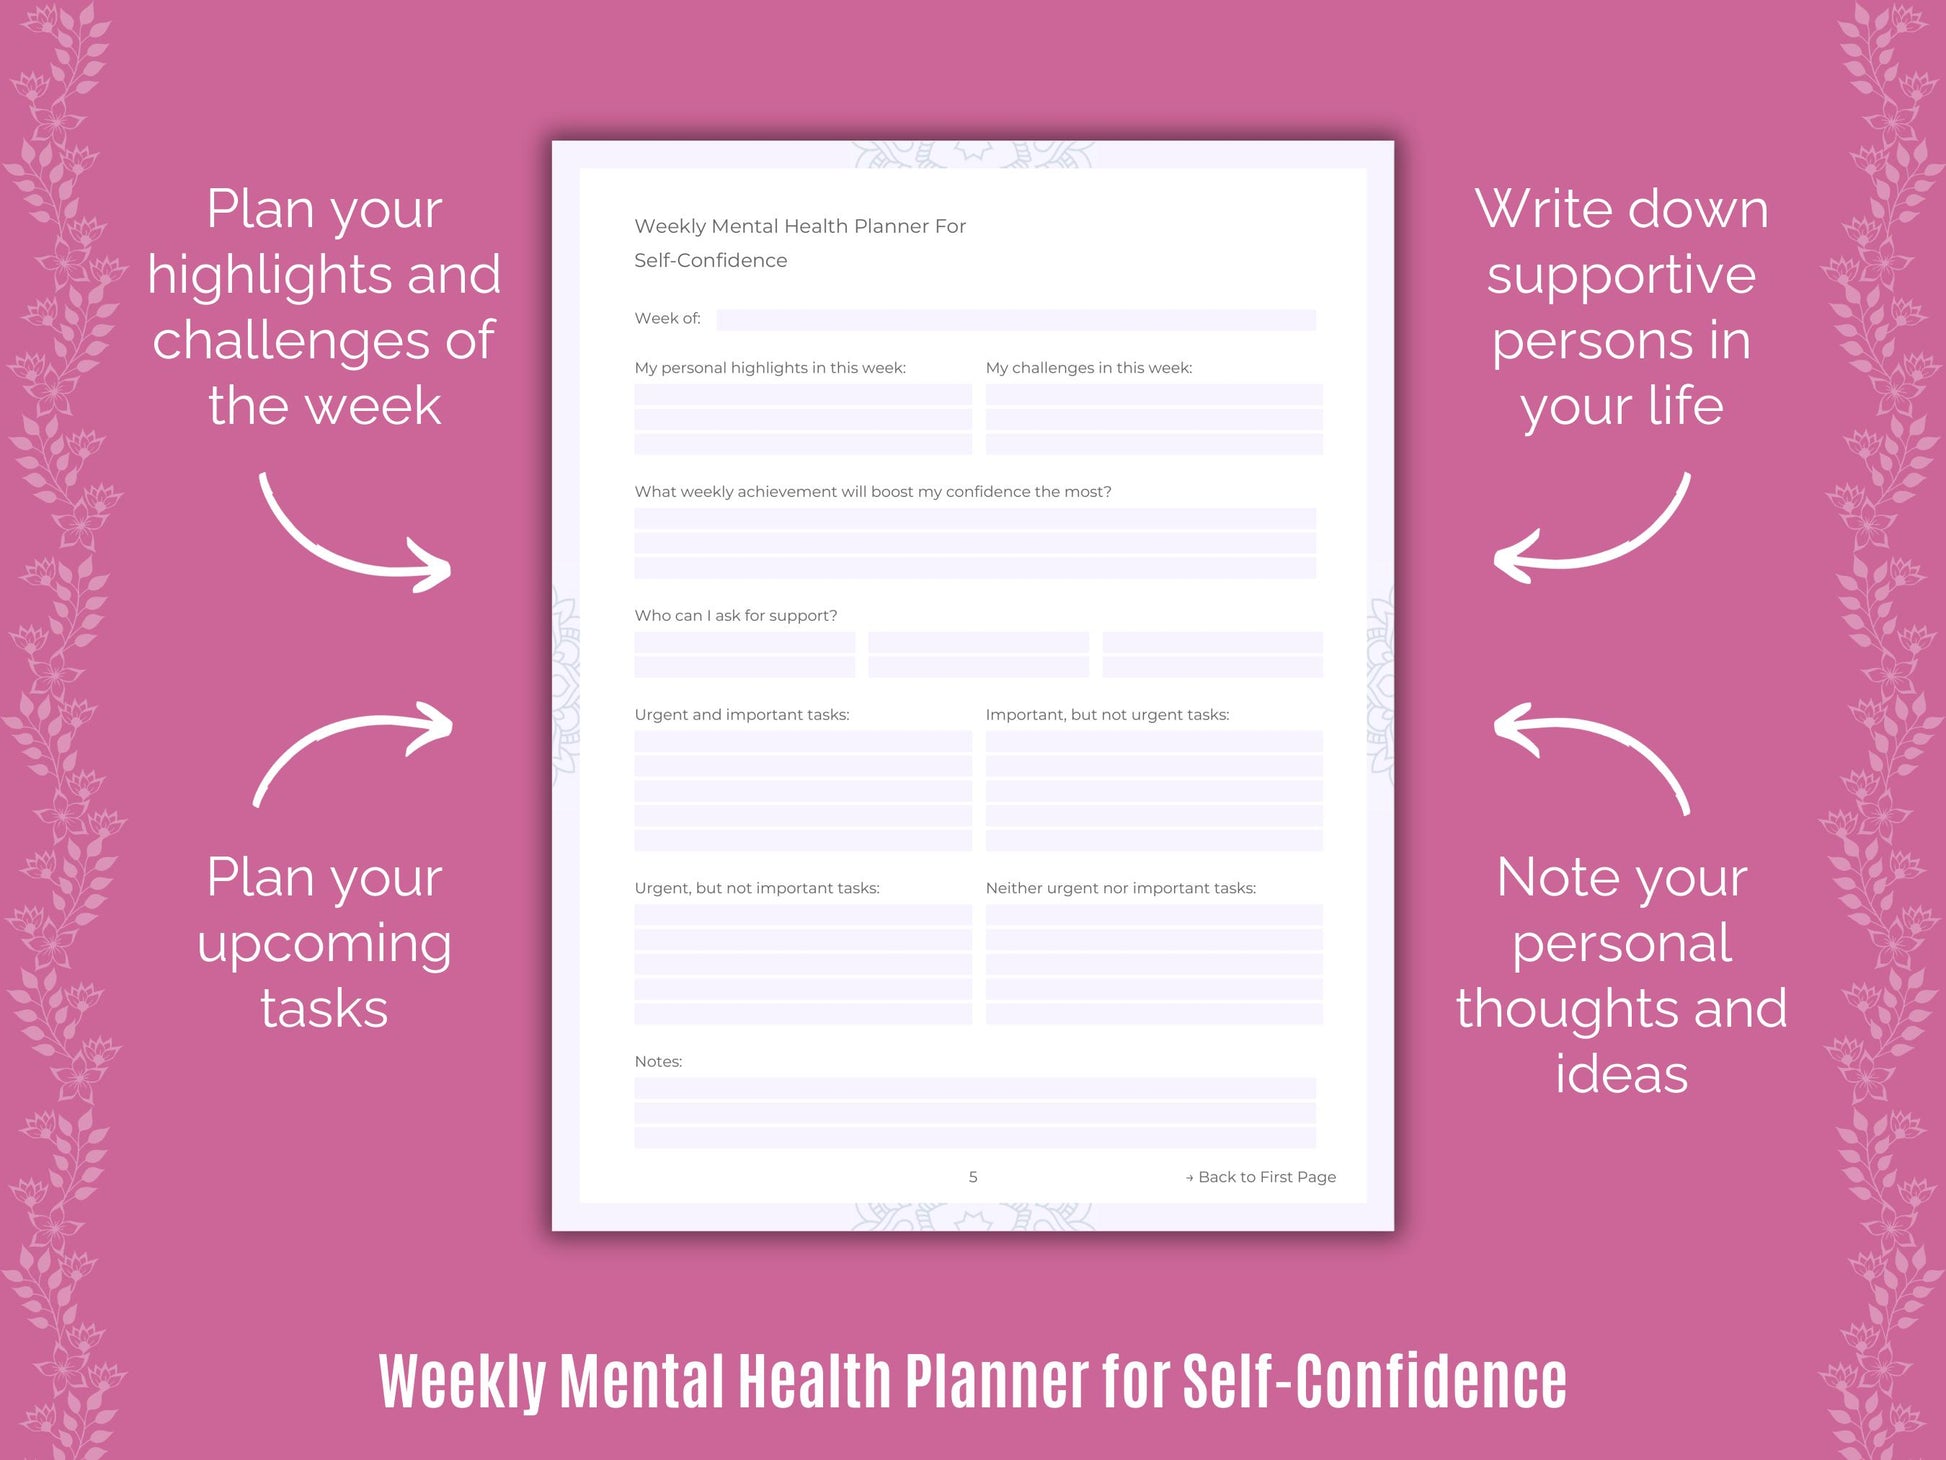 Templates, Therapy, Resources, Cheat Sheet, Planners, Self-Confidence Mental Health, Journaling, Goal Setting, Workbooks, Counseling, Journals, Notes, Tools